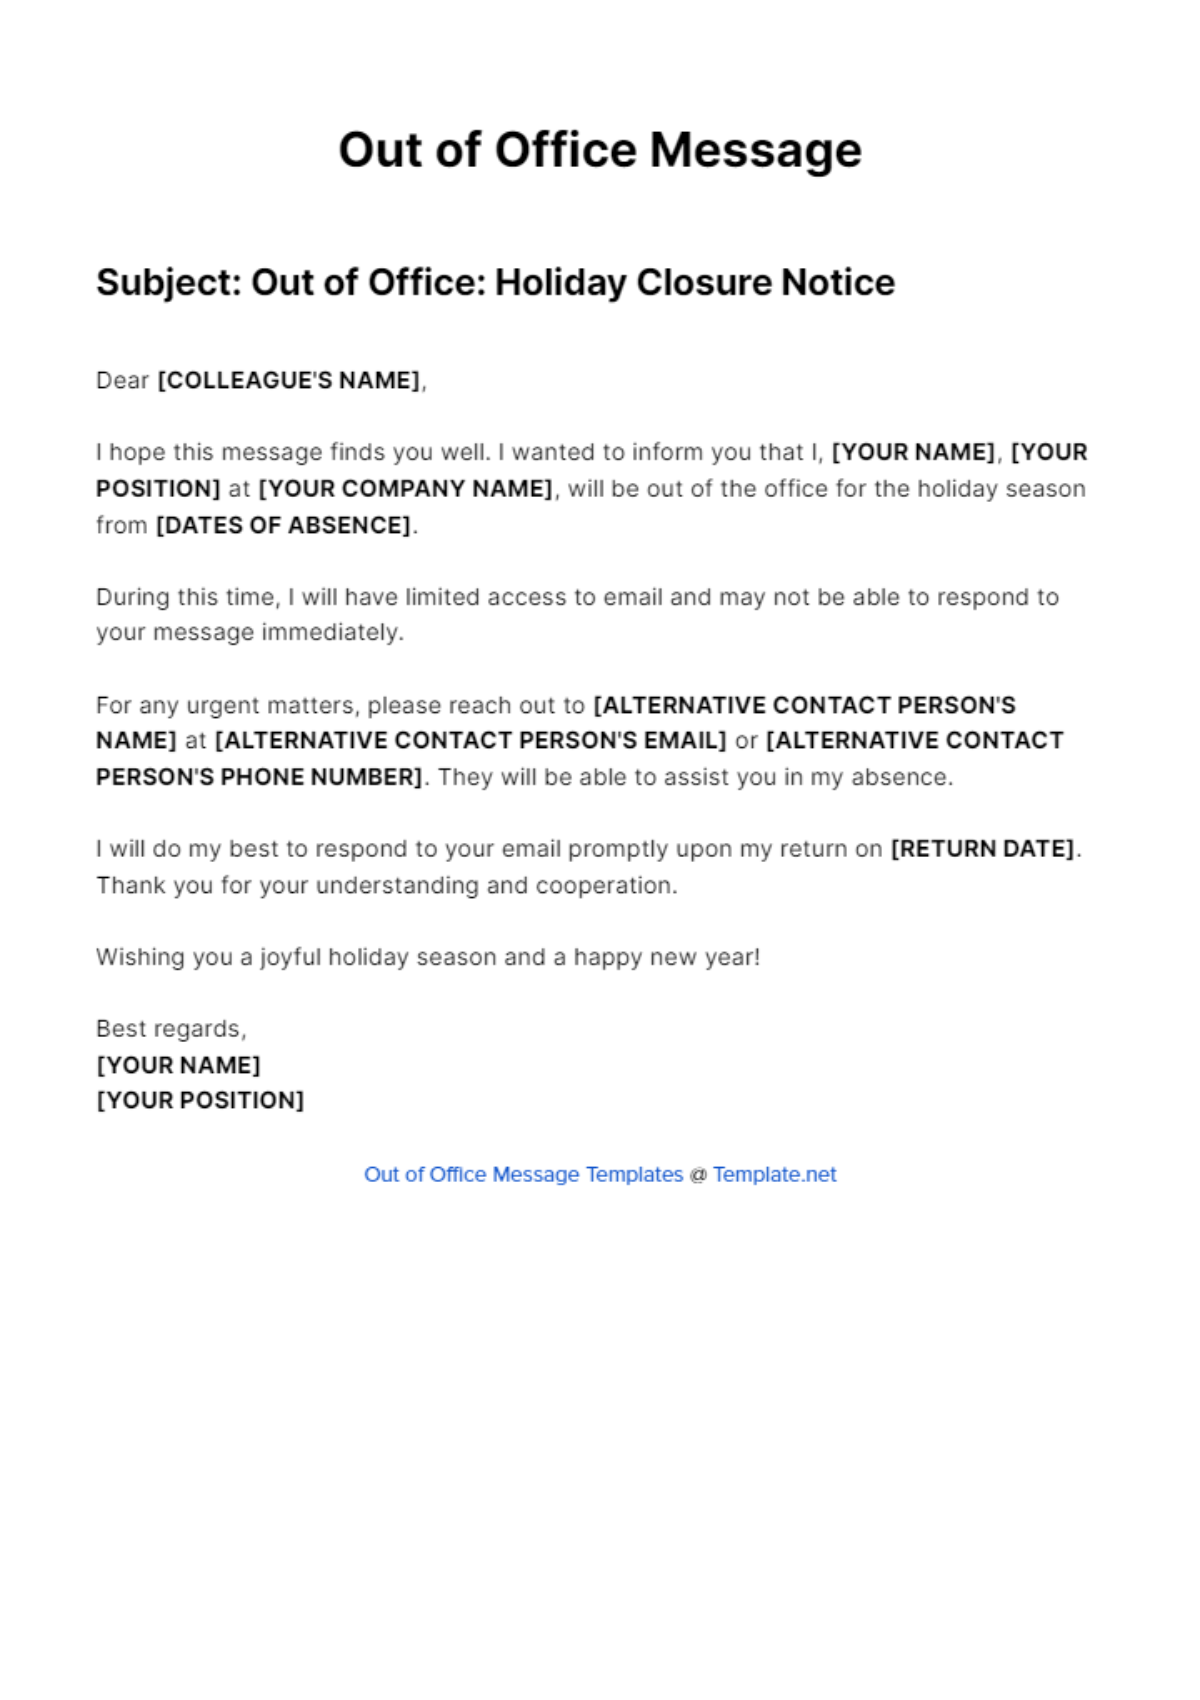 Out Of Office Message for Holiday Closure Template